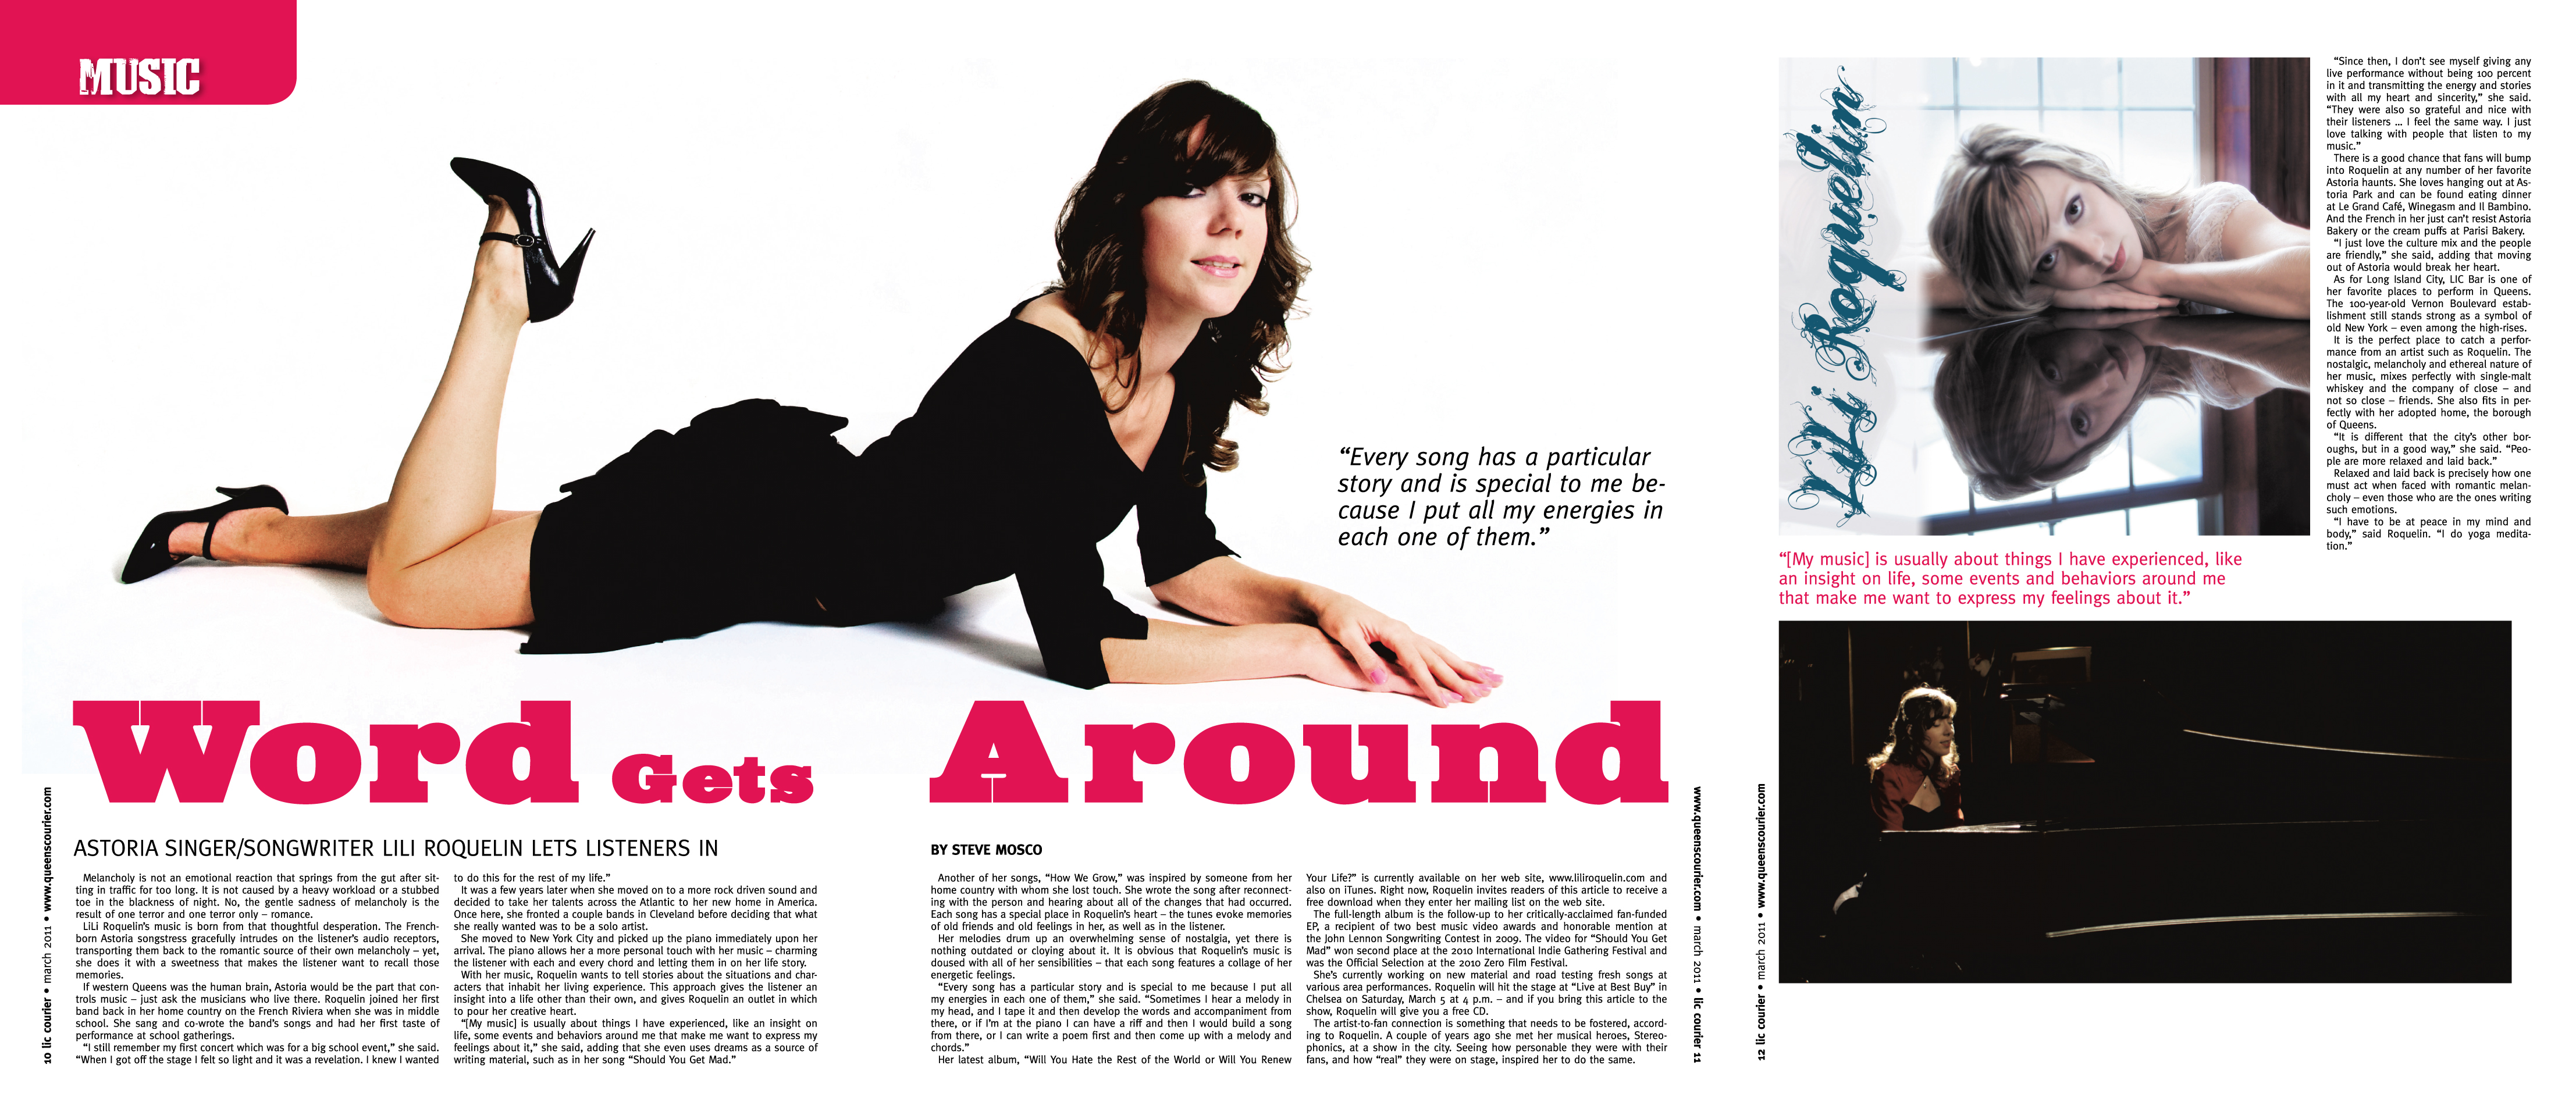 Word Gets Around (3 Pages-LIC Courier Magazine) | LiLi Roquelin